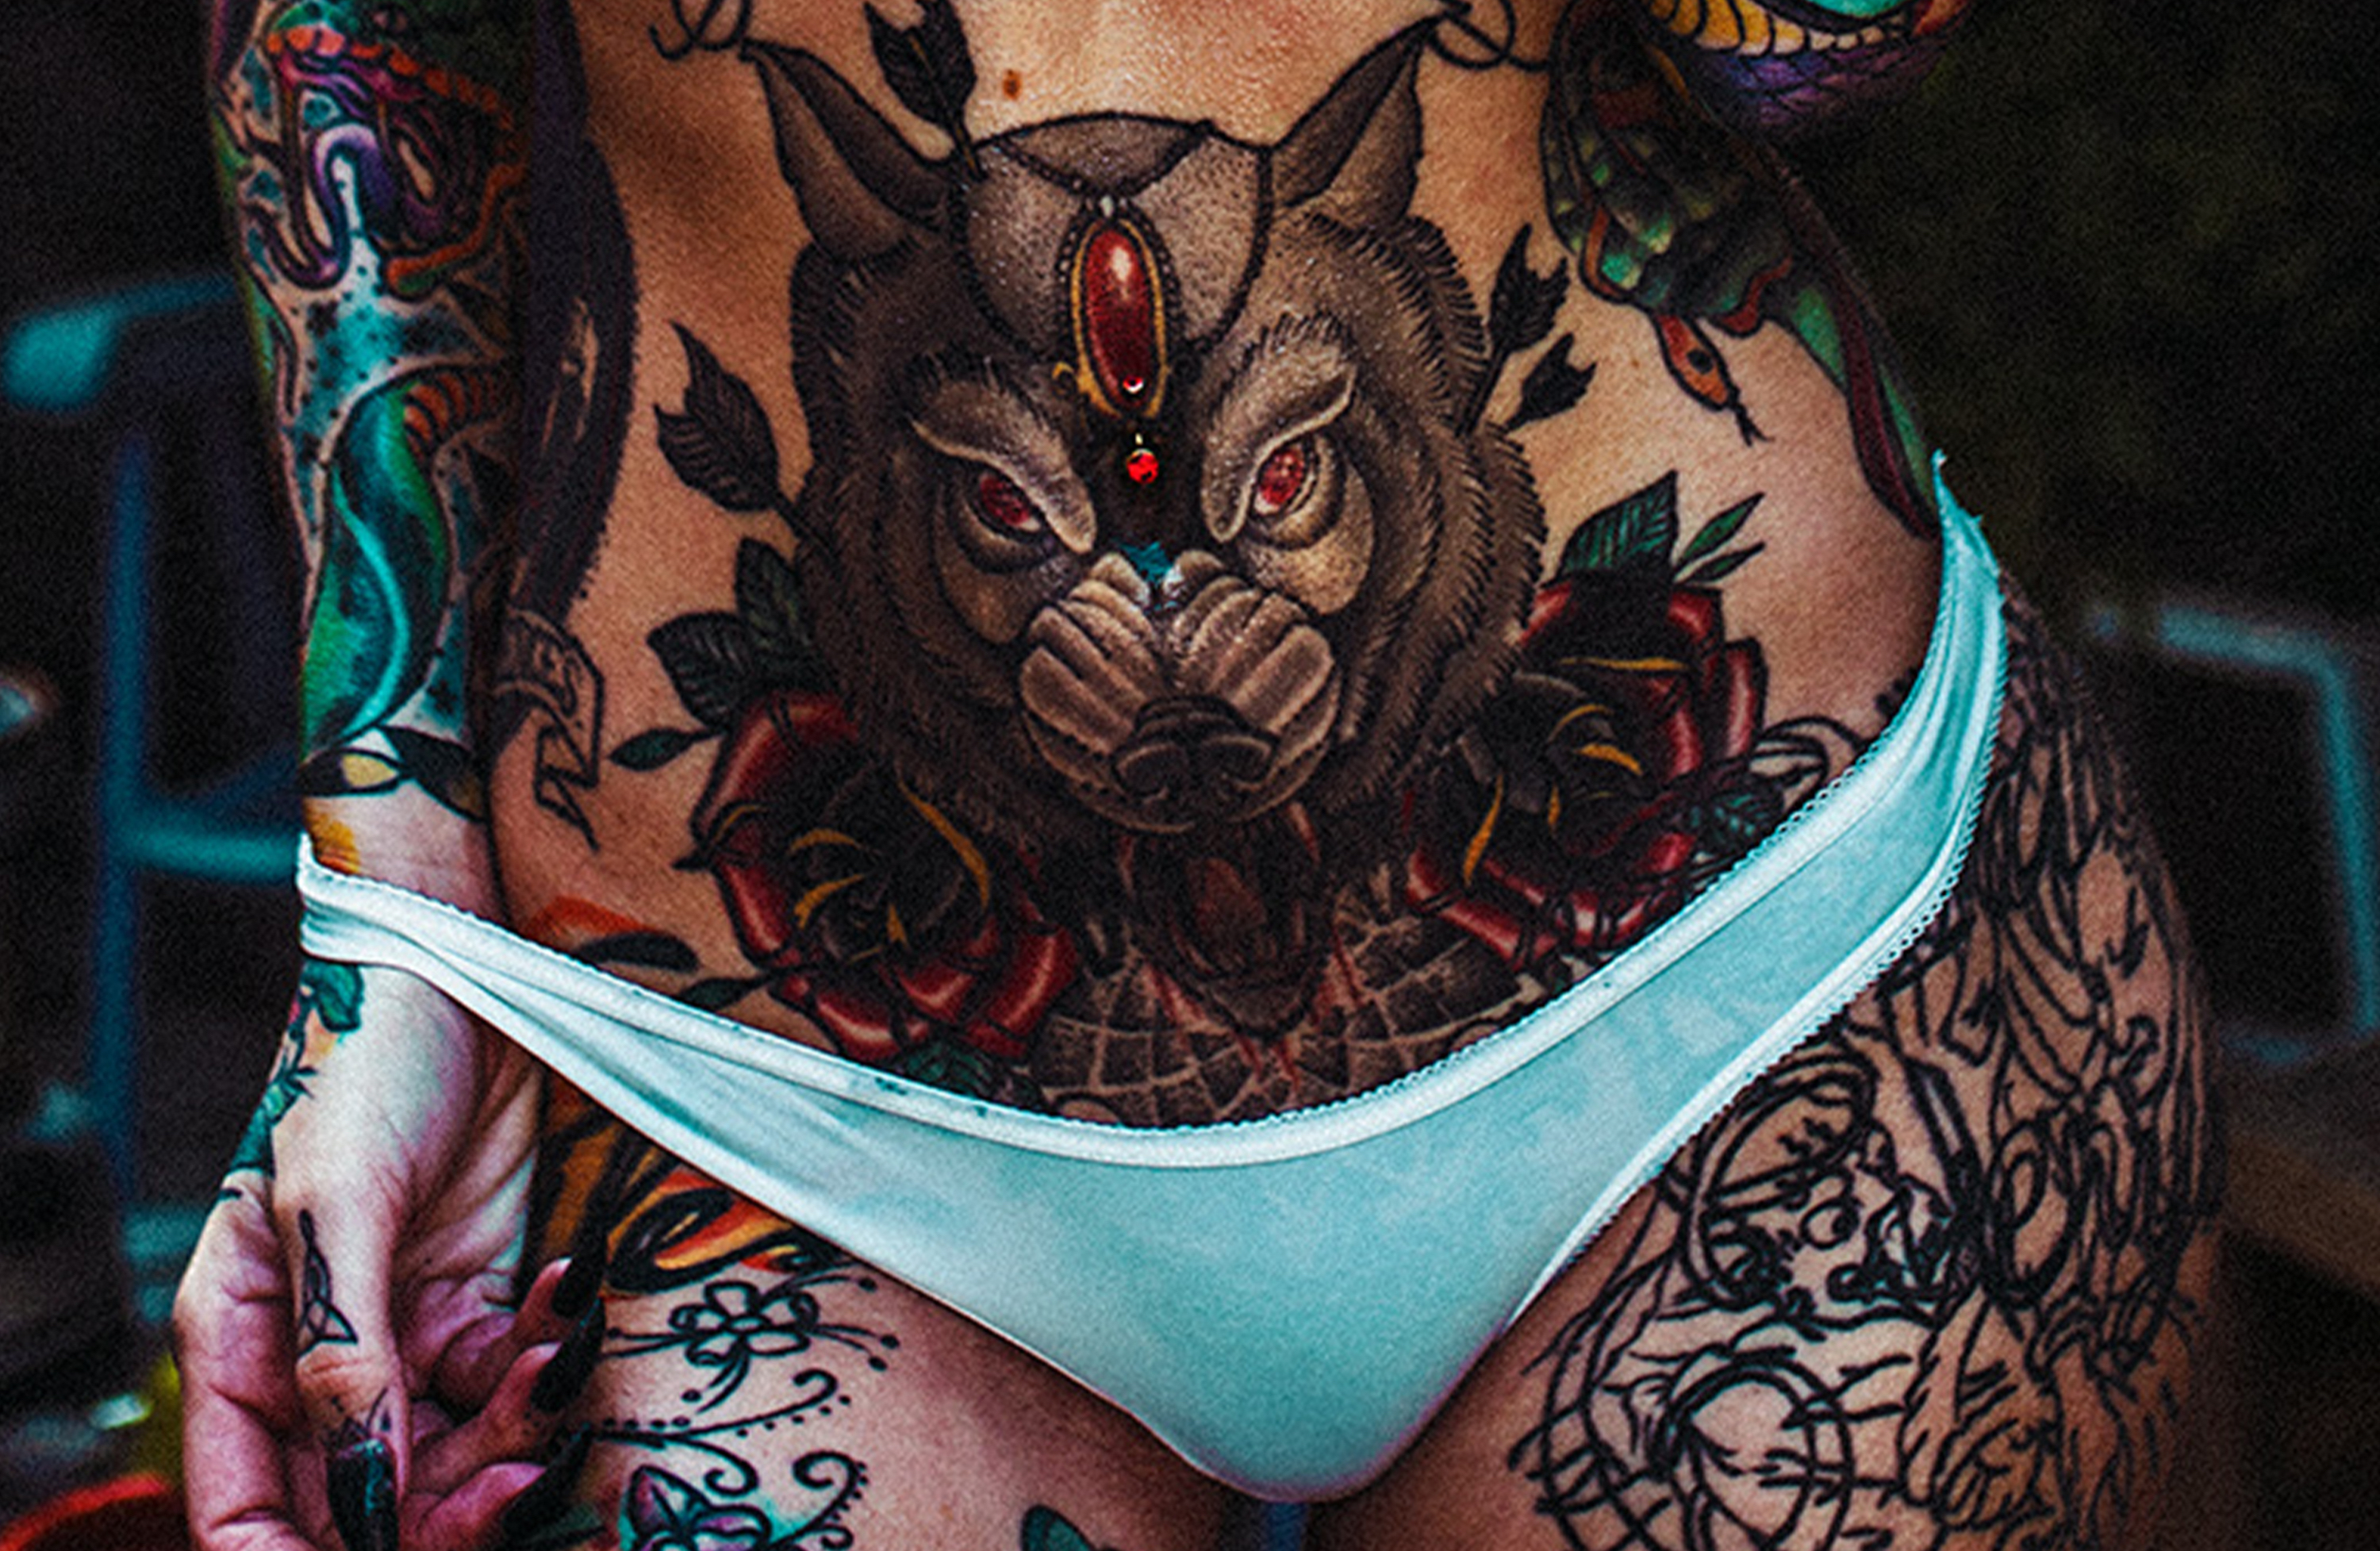 Name of tattooed woman on bad wolves nation album cover